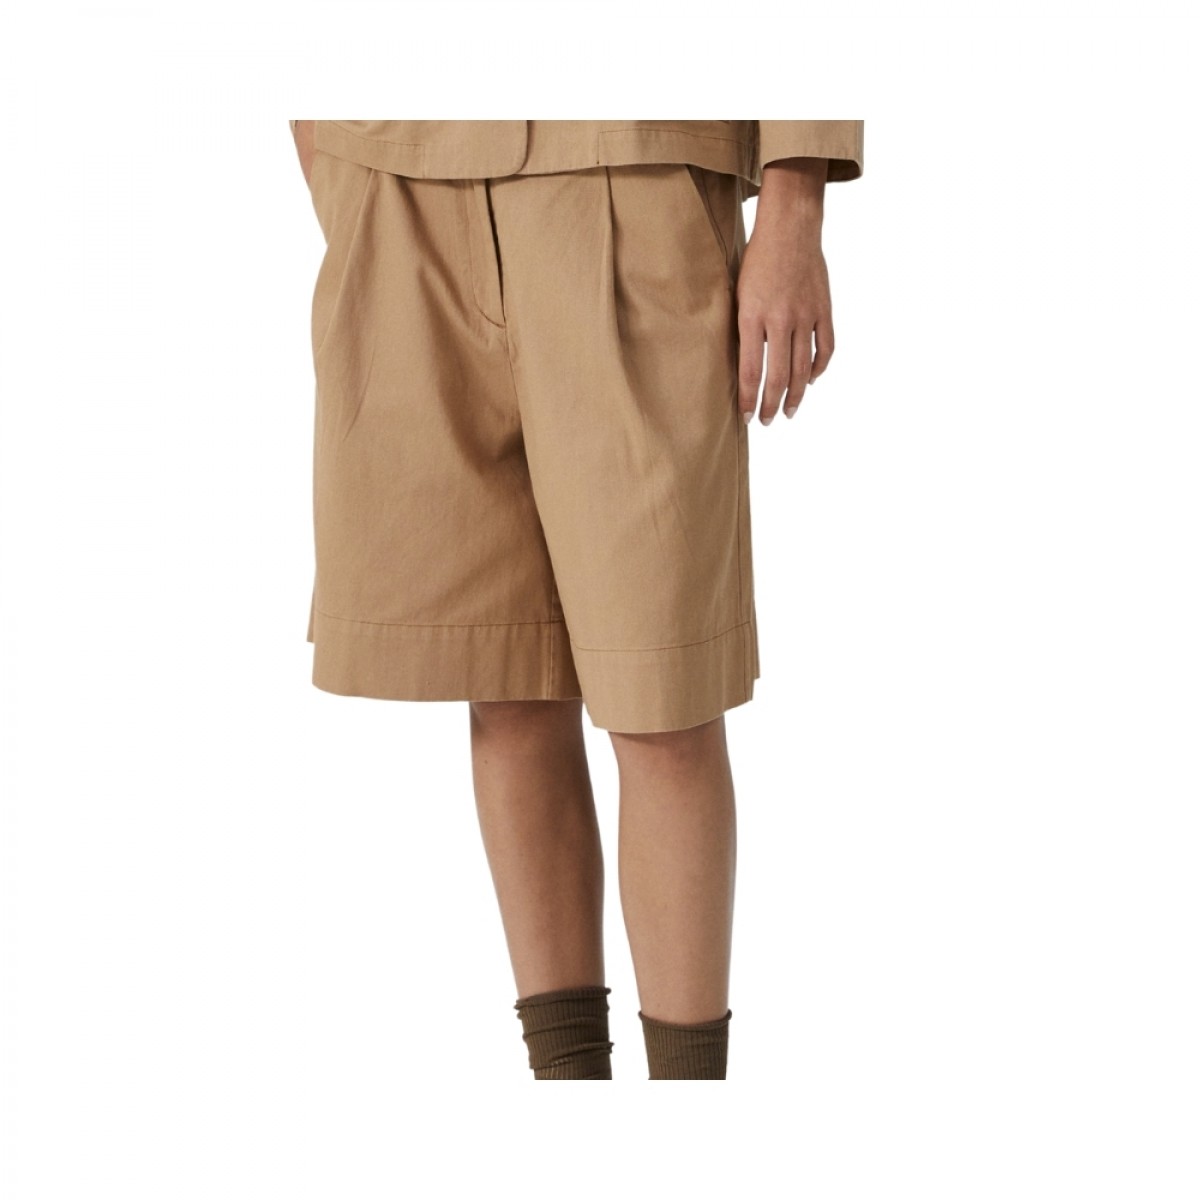 willy shorts - caramel - model front